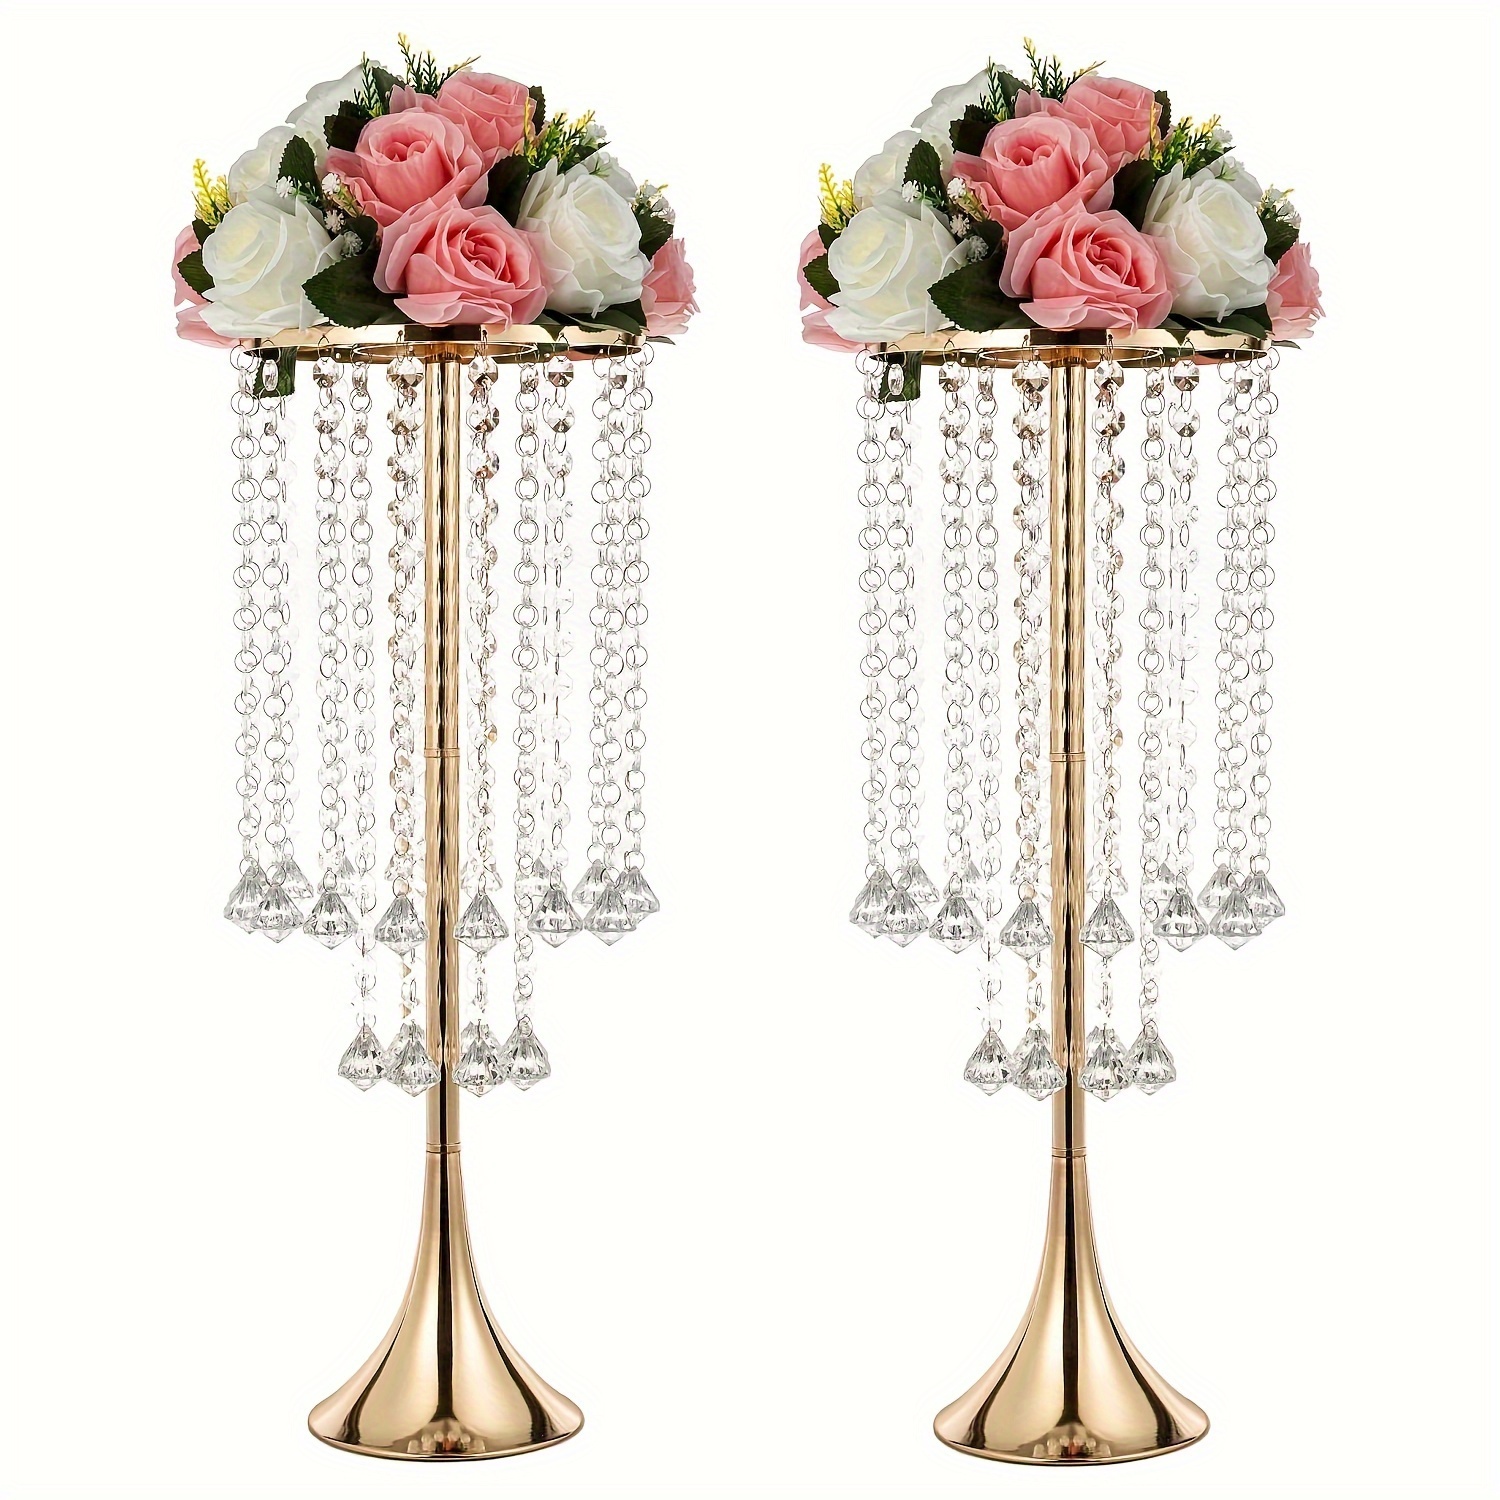 

2pcs 21.88" Height Elegant Centerpieces With Chandelier Crystals Metal Vase Flower Stand For Table Wedding Centerpieces Decorations, Christmas,event, Home, Party